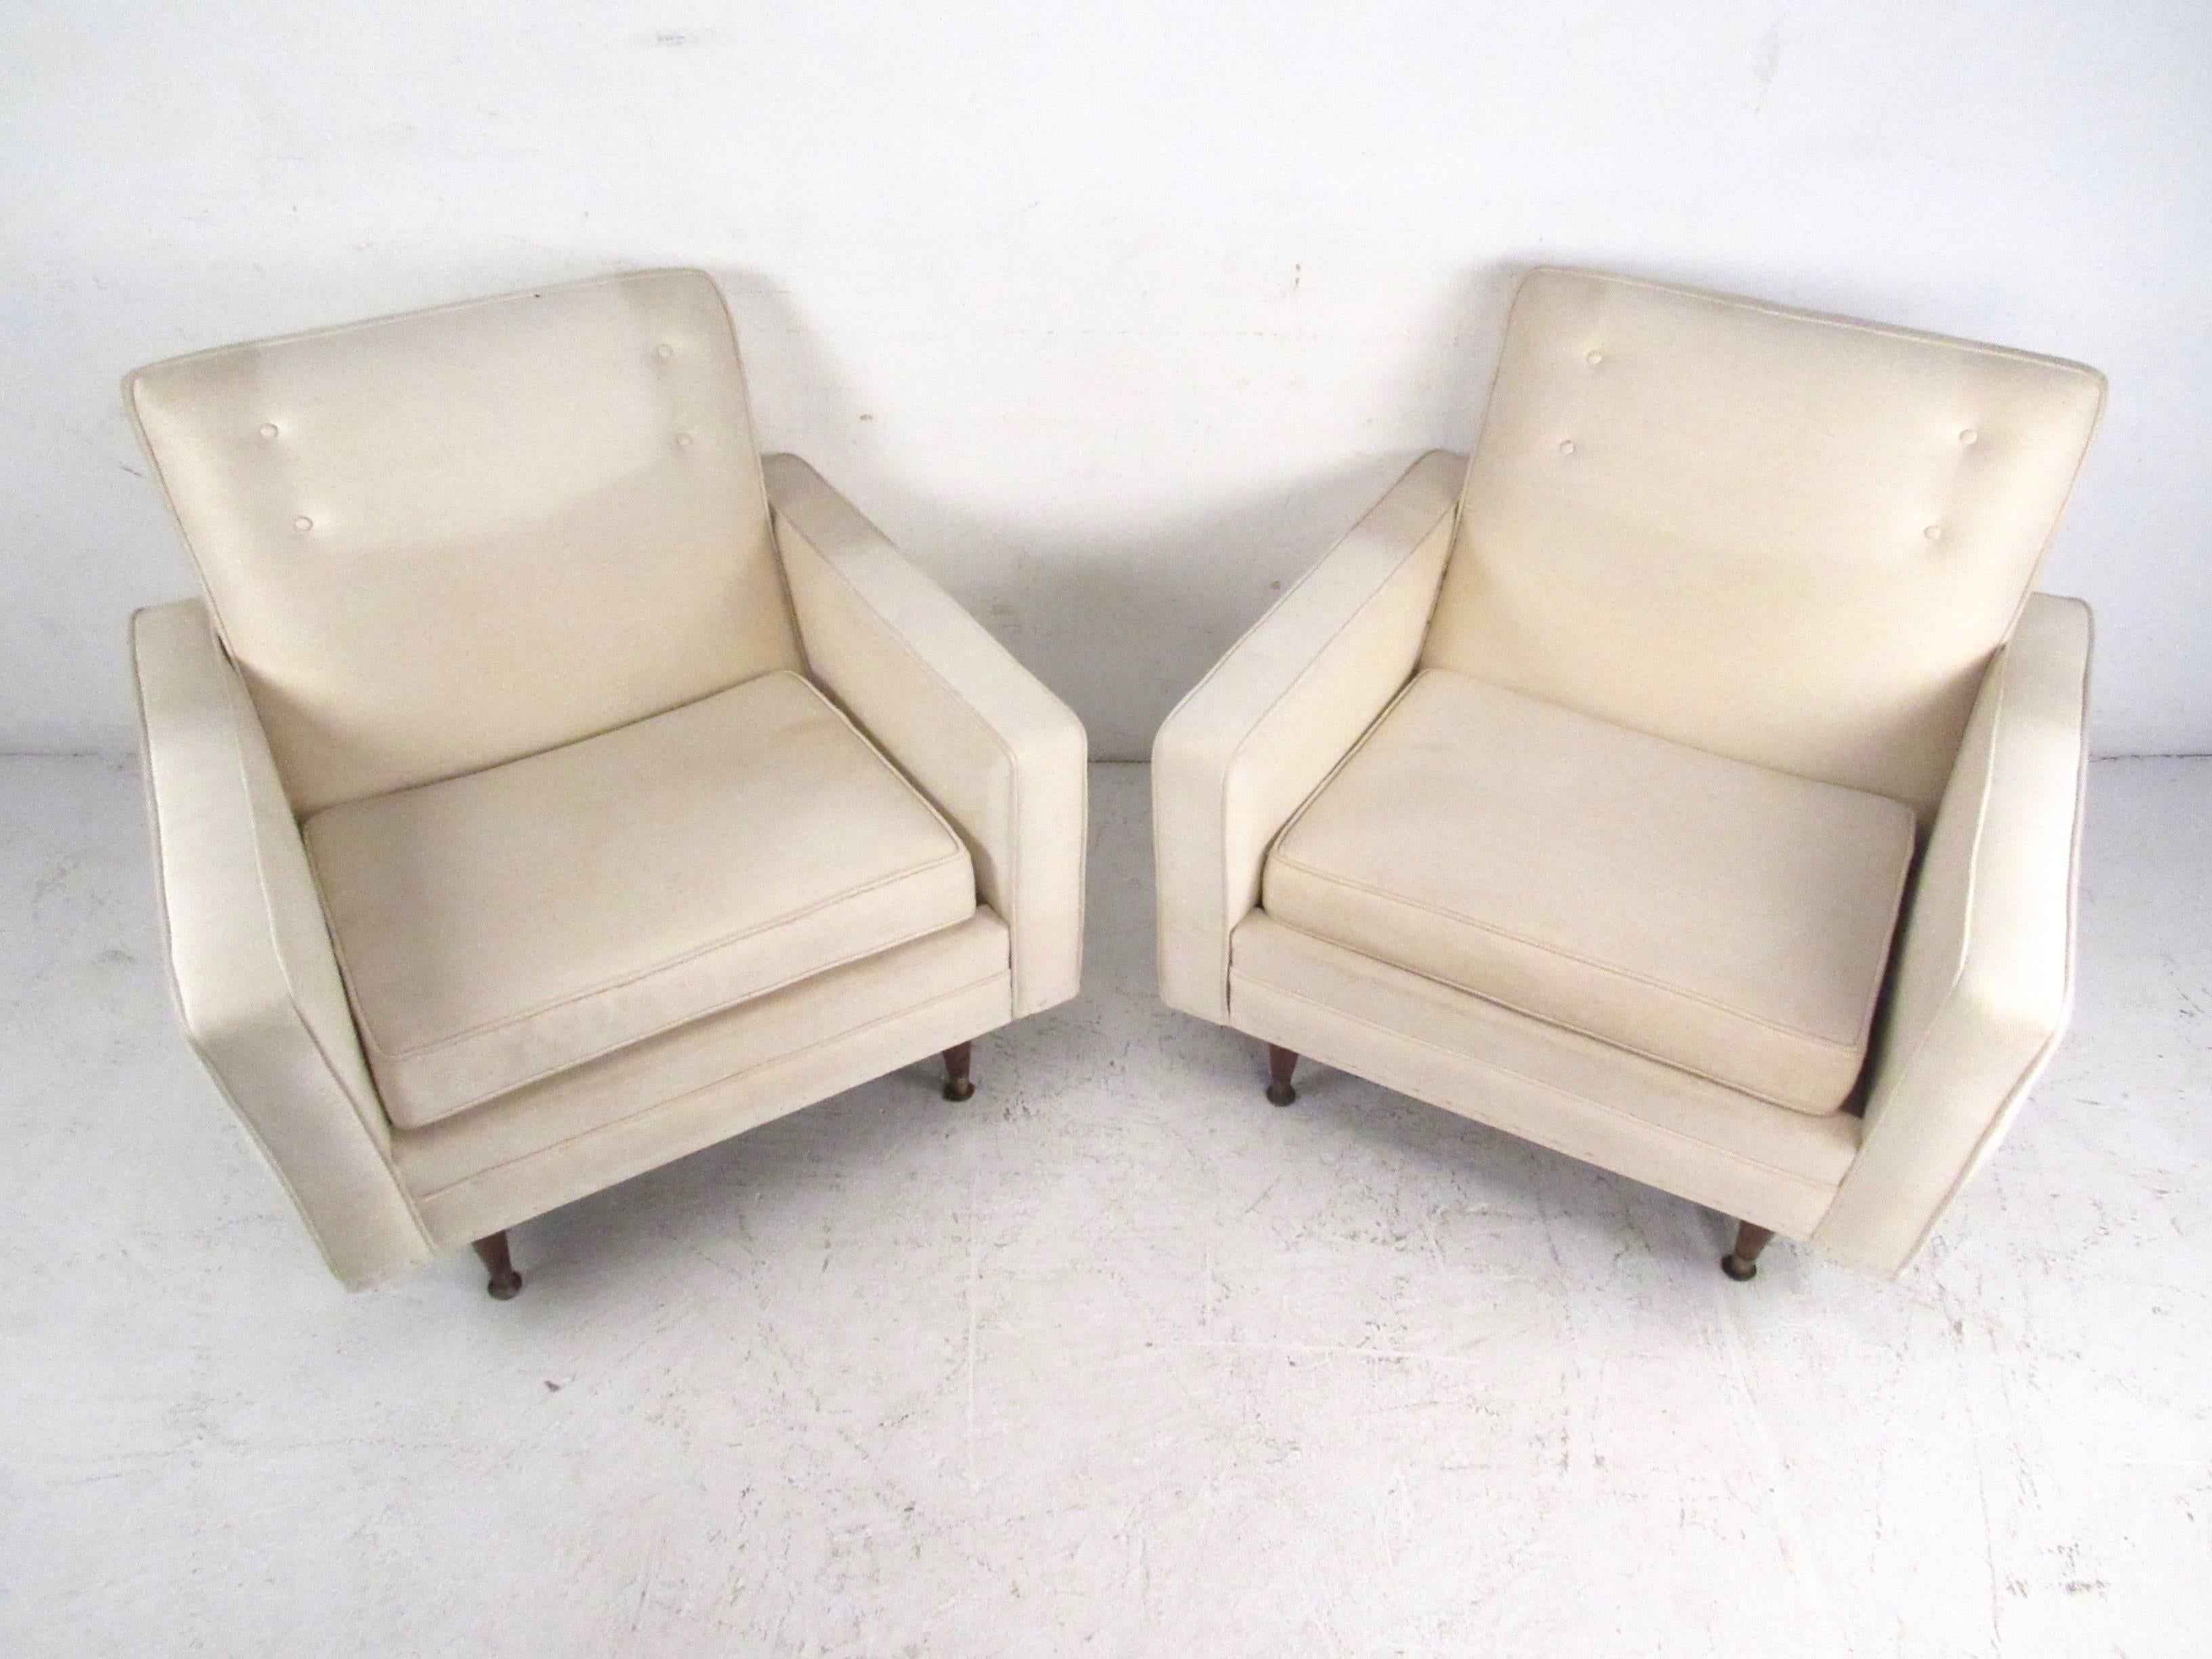 American Pair of Mid-Century Modern Paul McCobb Style Lounge Chairs